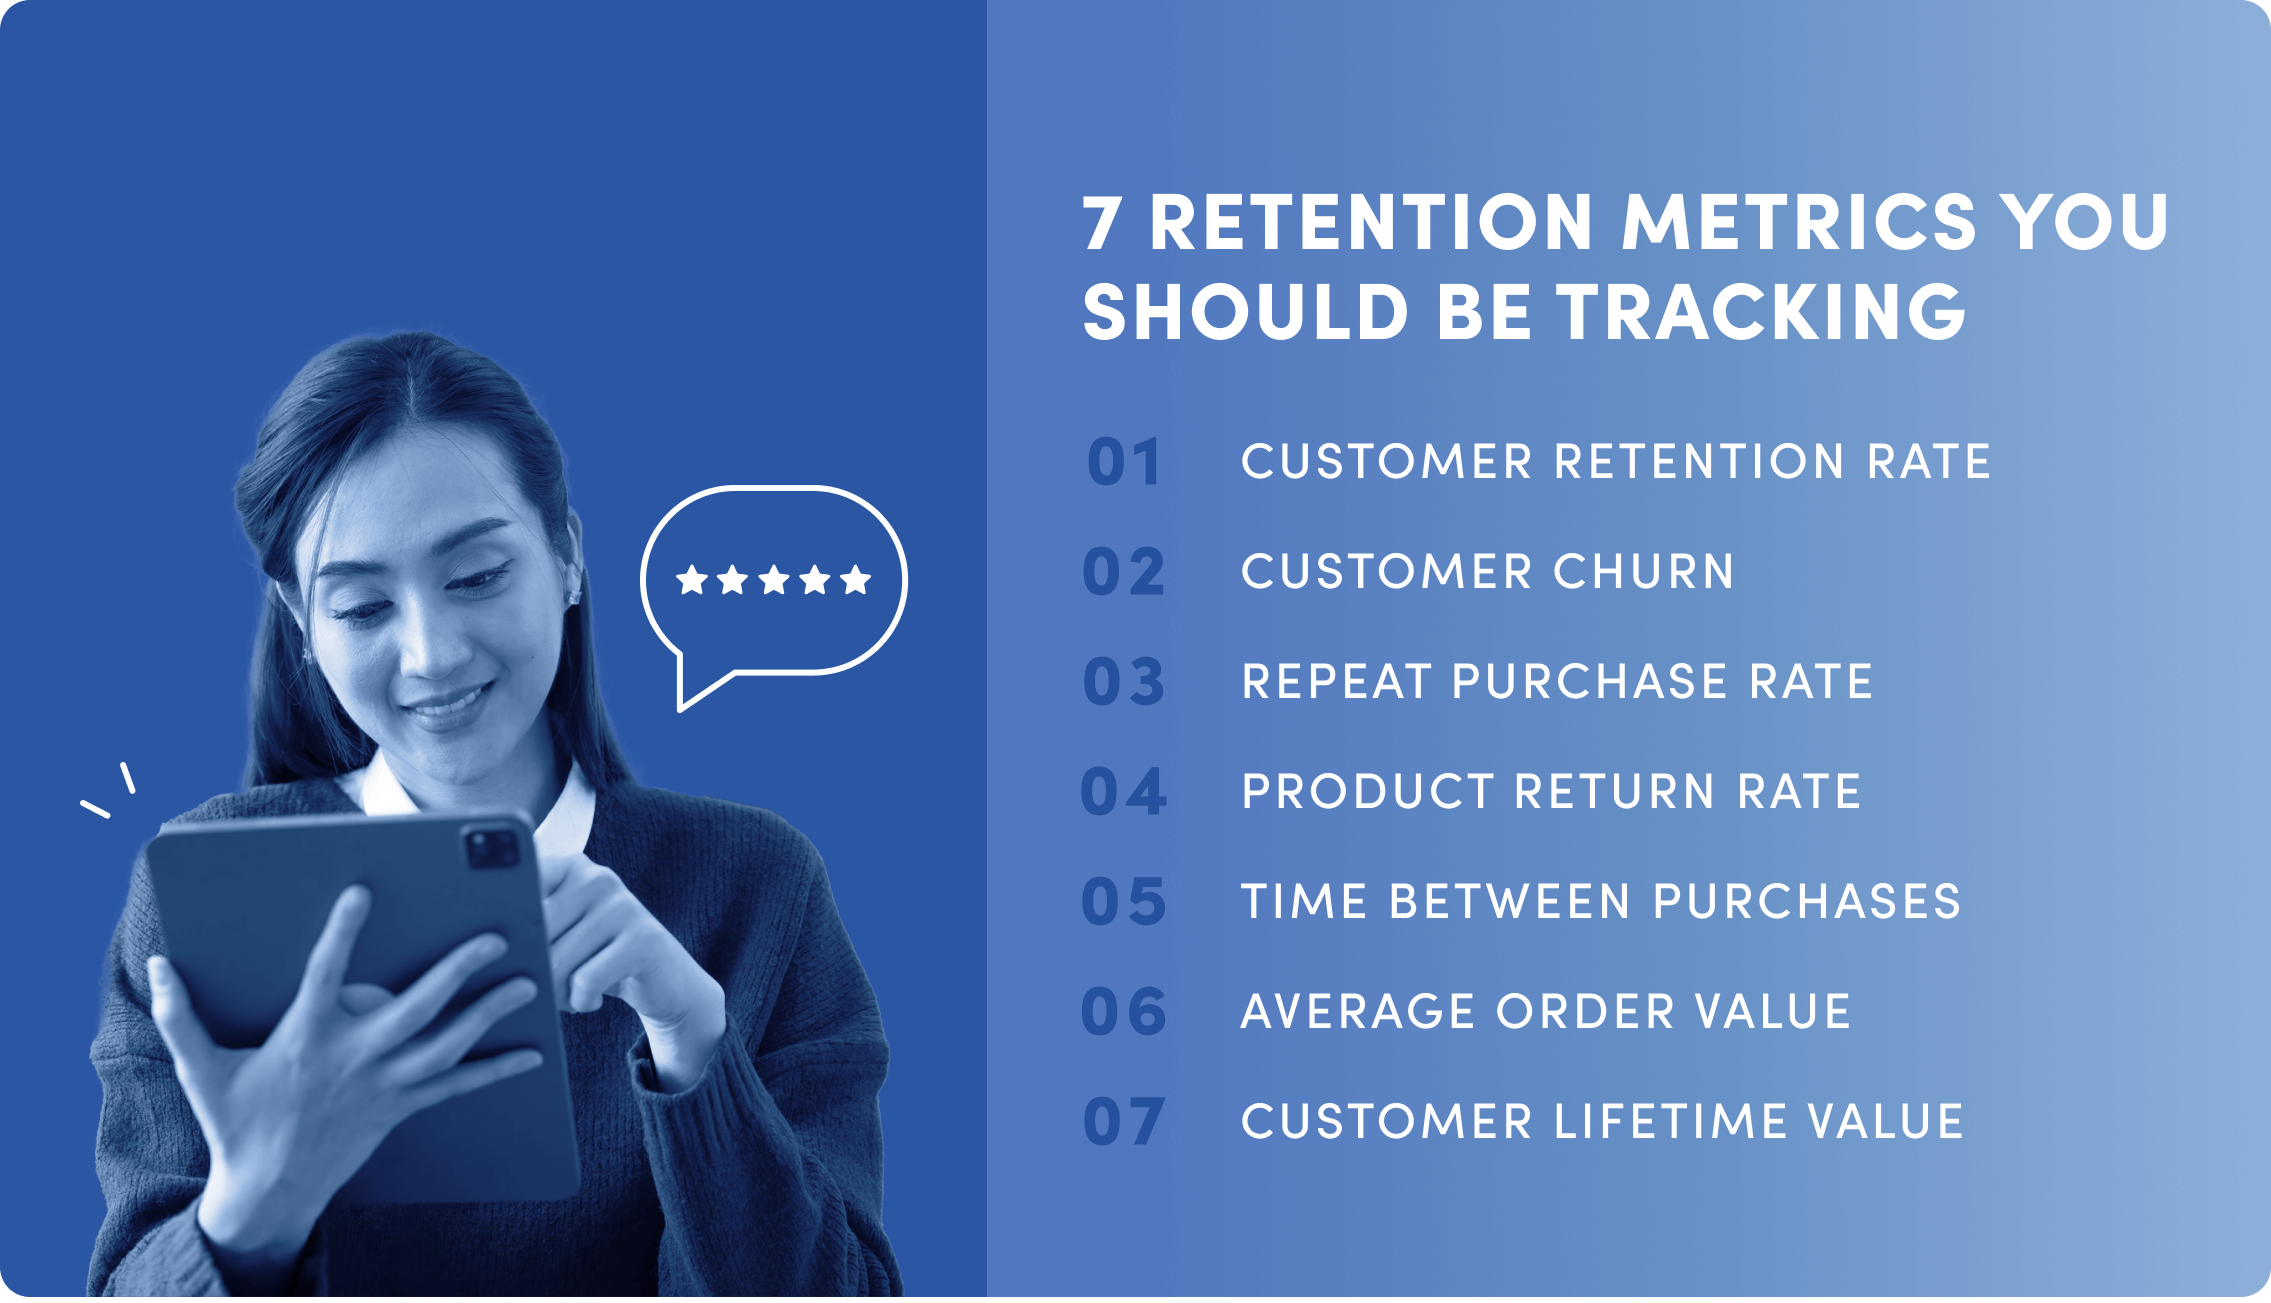 A list of 7 retention metrics you should be tracking